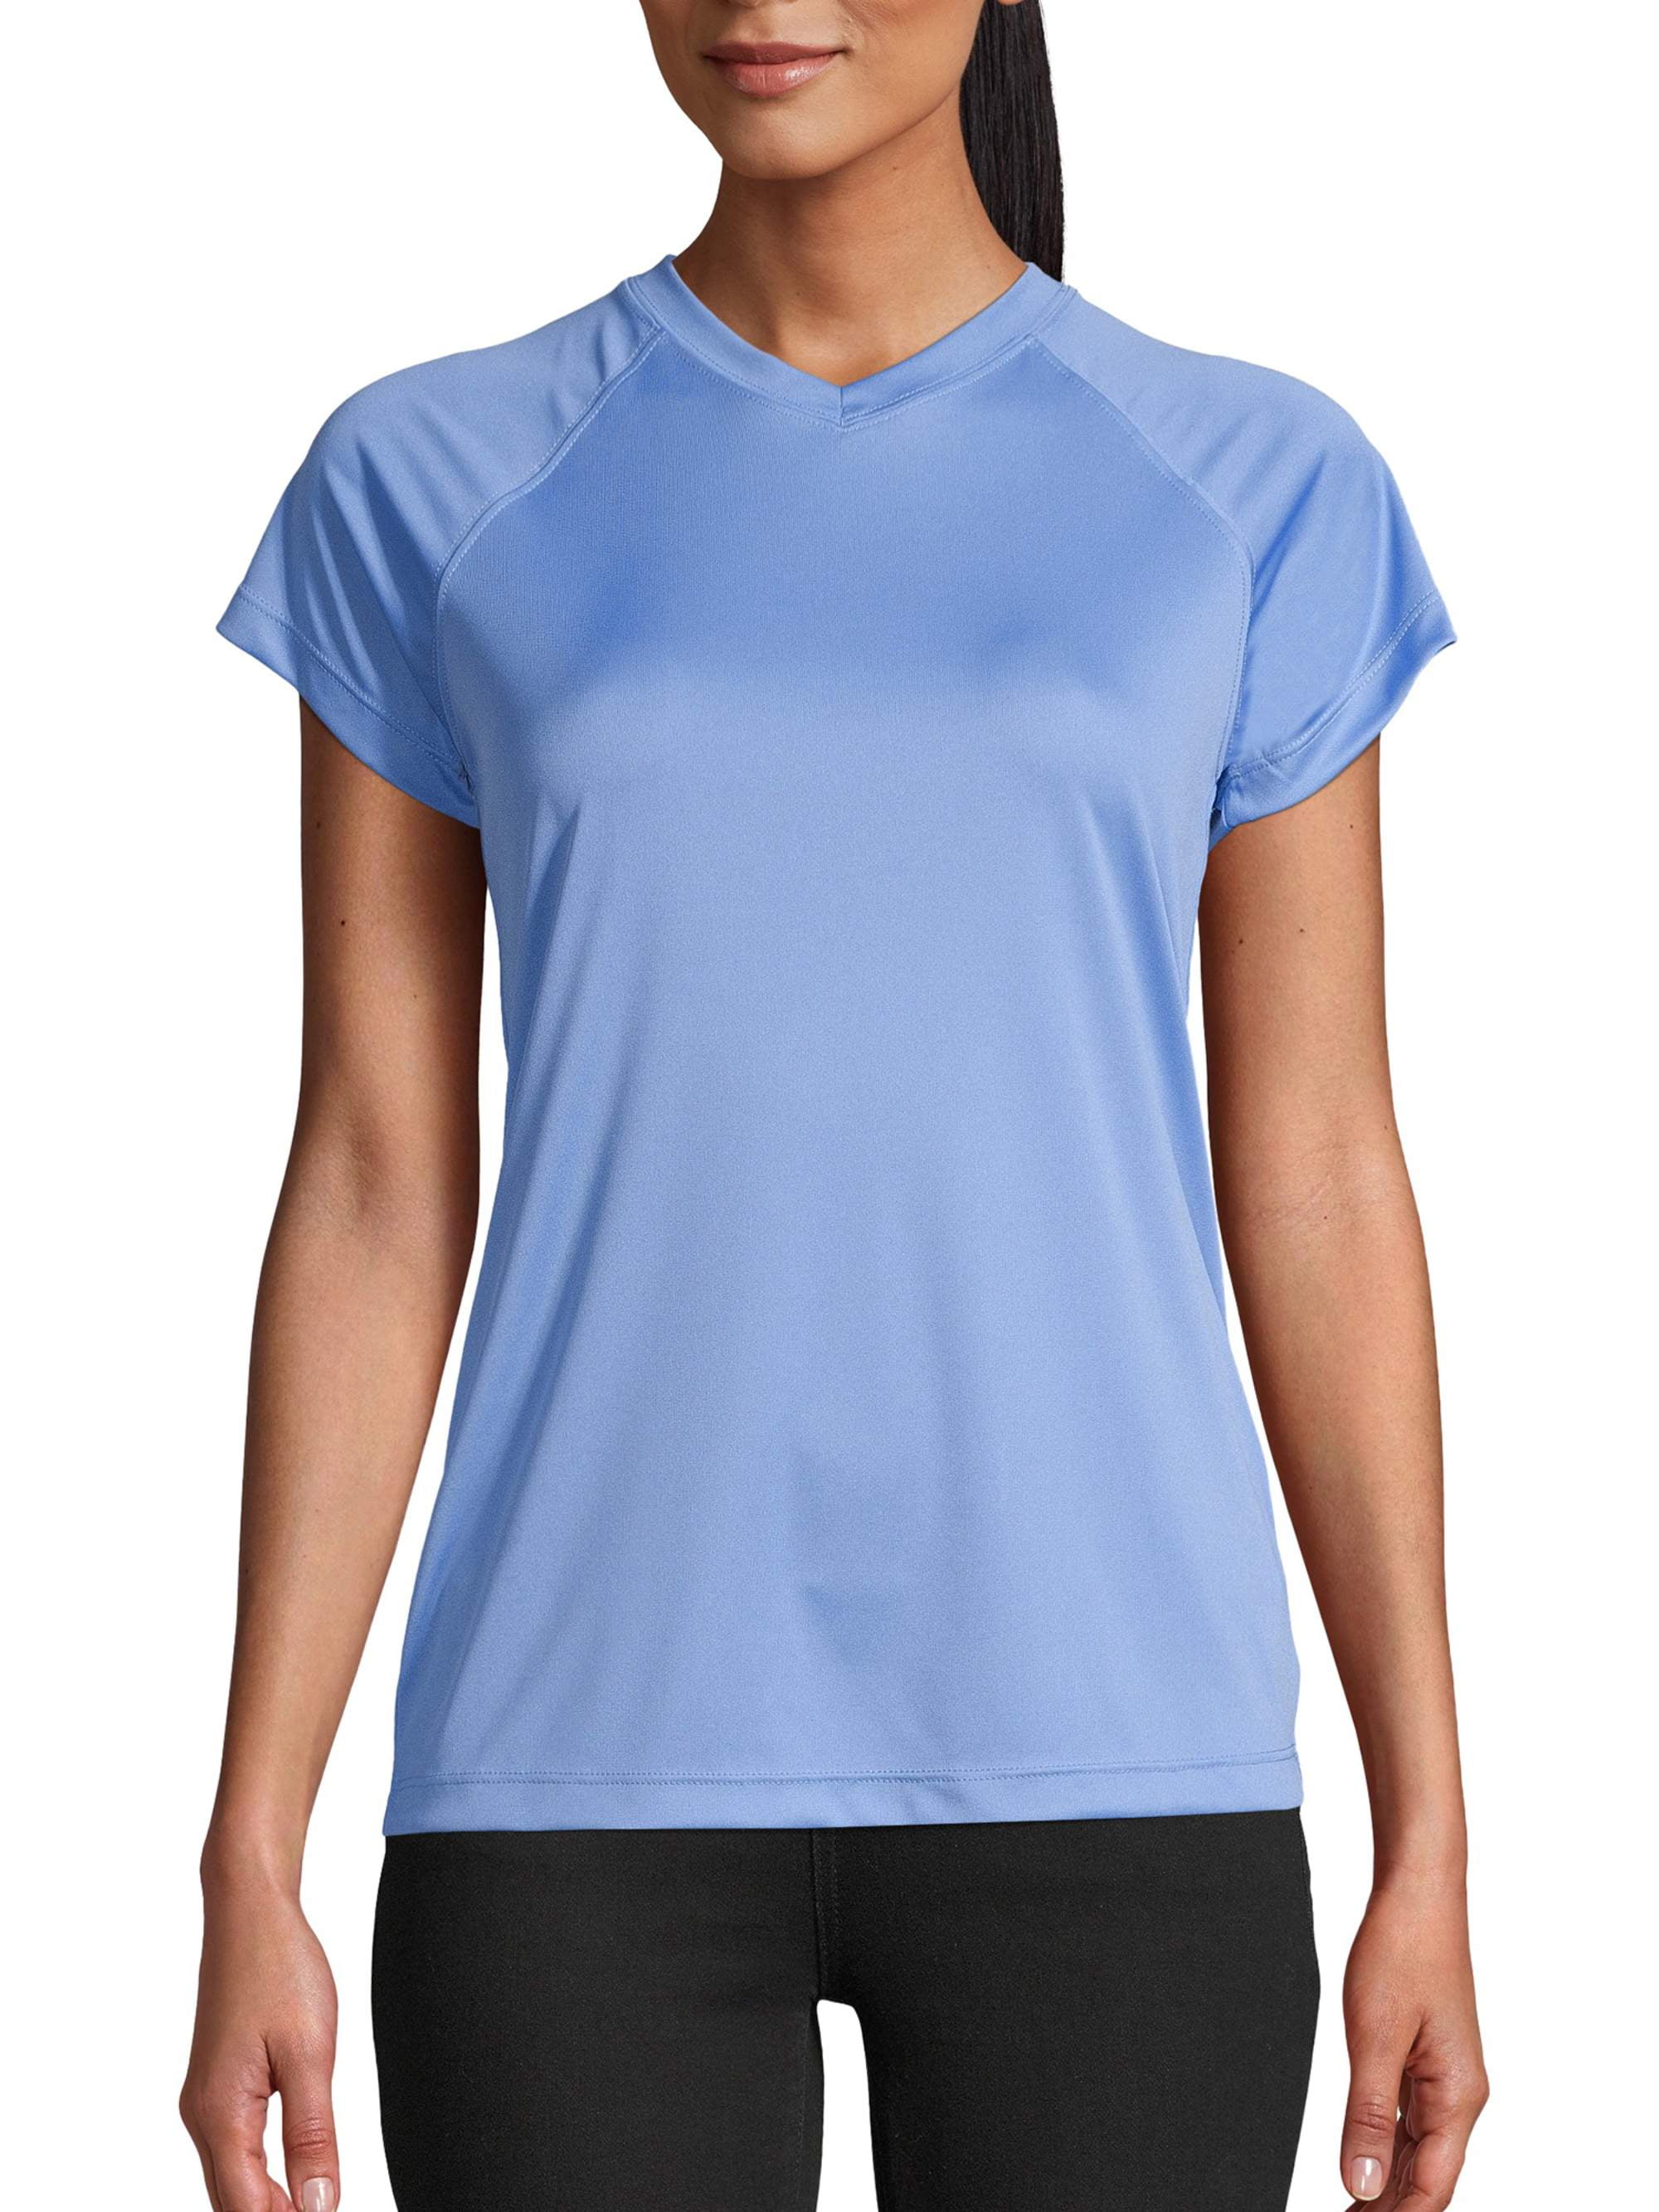 C9 Champion Duo Dry Athletic V-Neck Workout Activewear T-Shirt Blue Women's  Sz S - Helia Beer Co